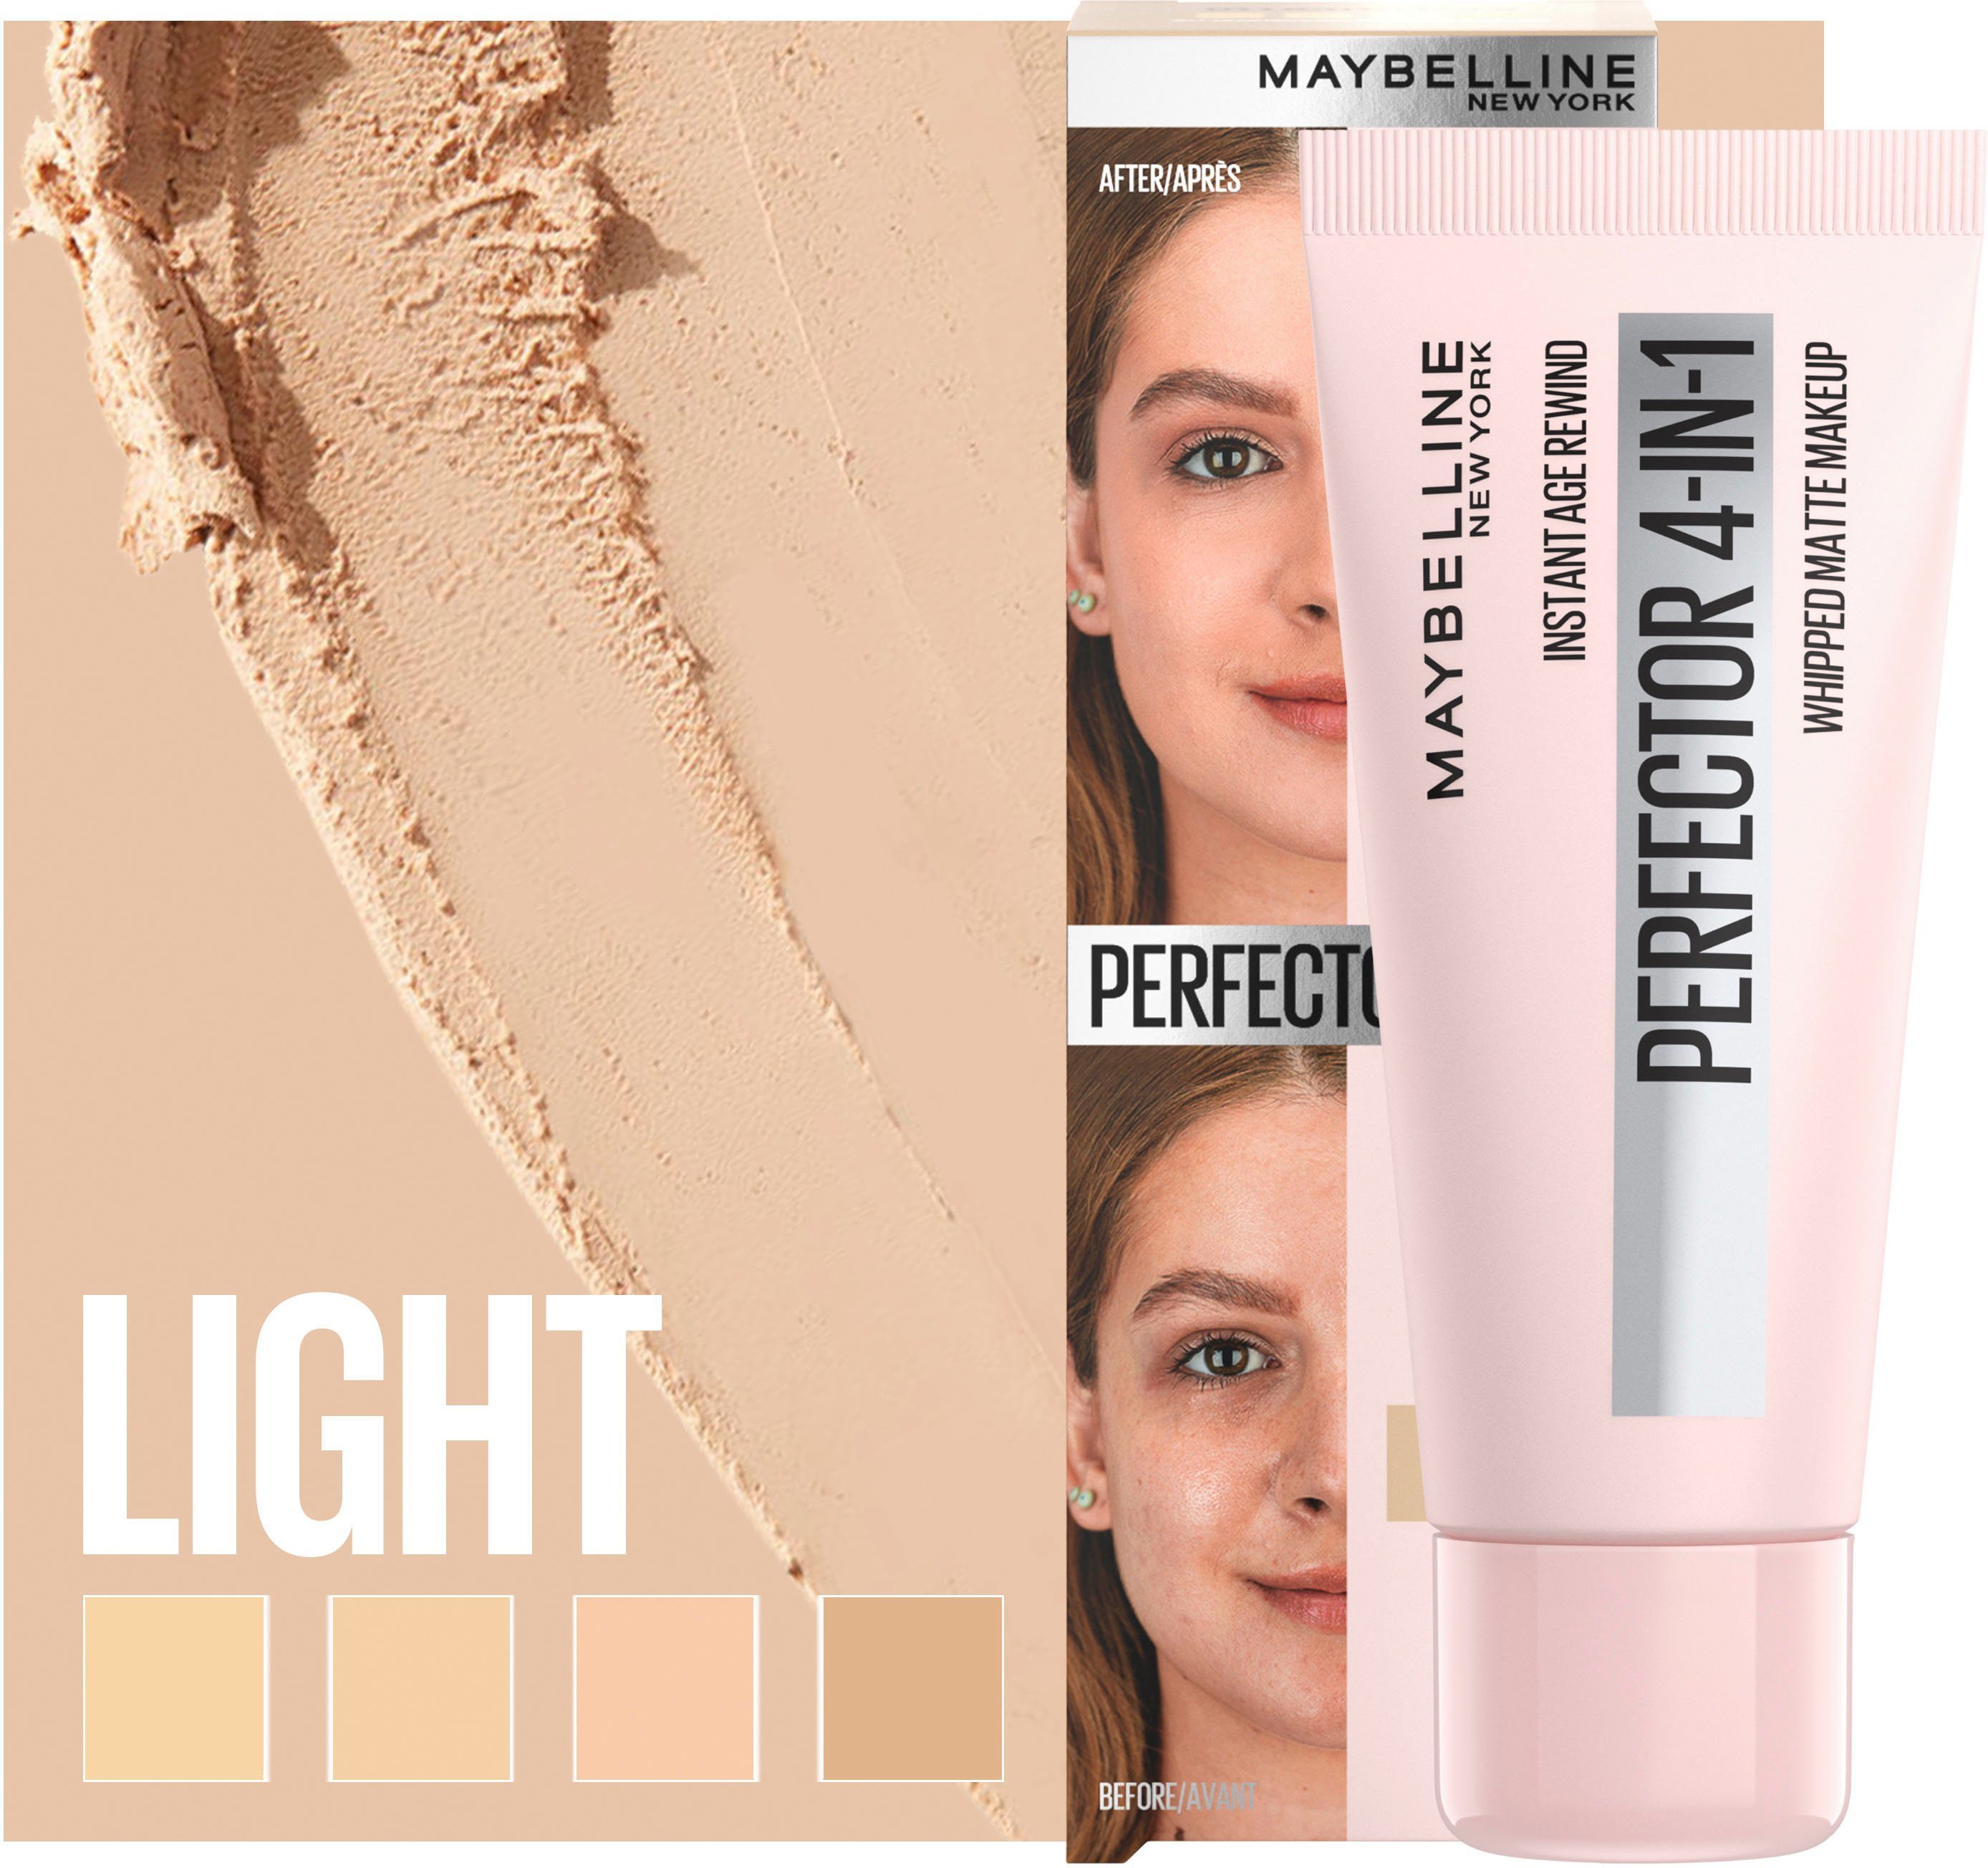 YORK Instant Perfector 1 Matte Foundation Light MAYBELLINE NEW